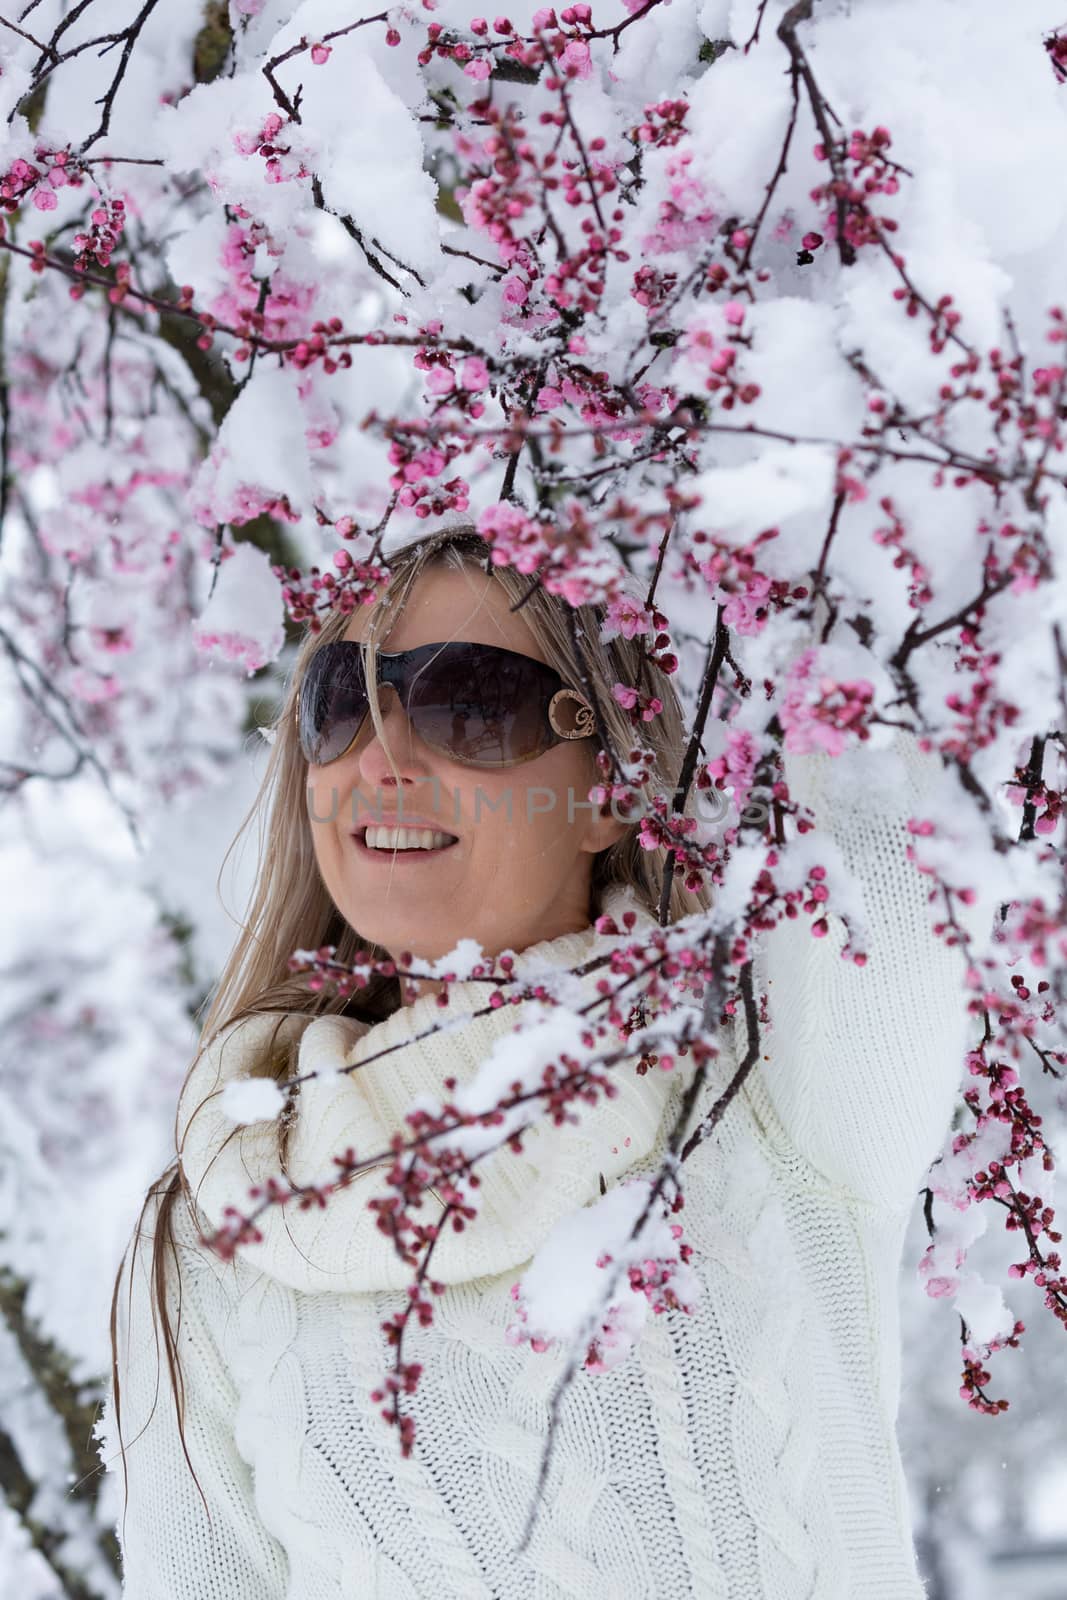 Woman by cherry blossom tree flowering in snow by lovleah